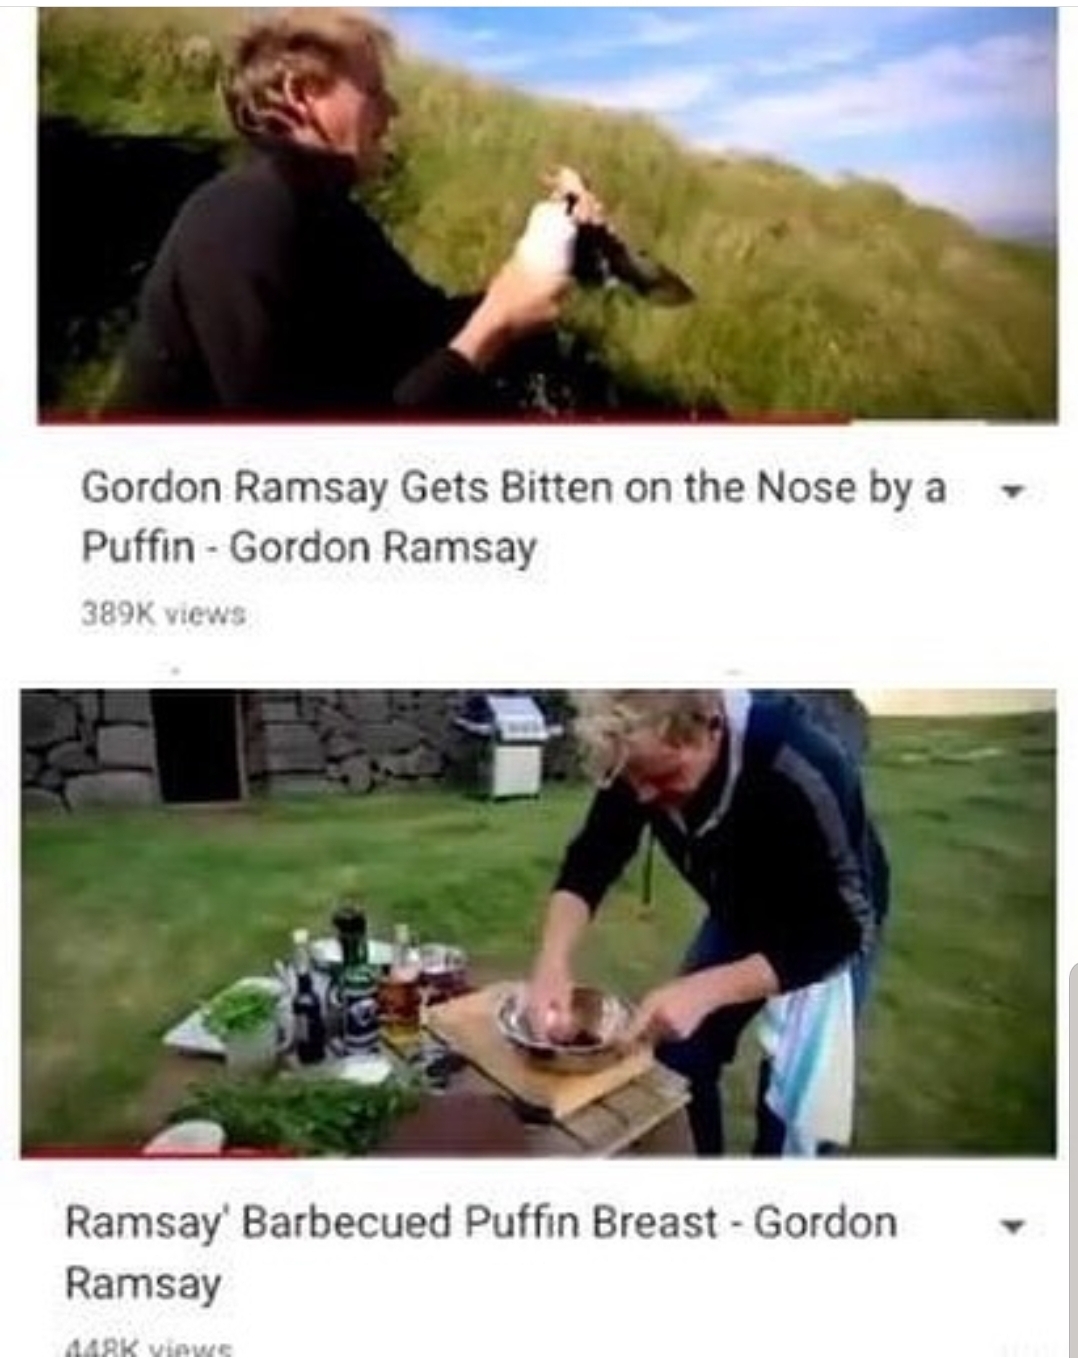 ...It's best not to bite Mr. Ramsay